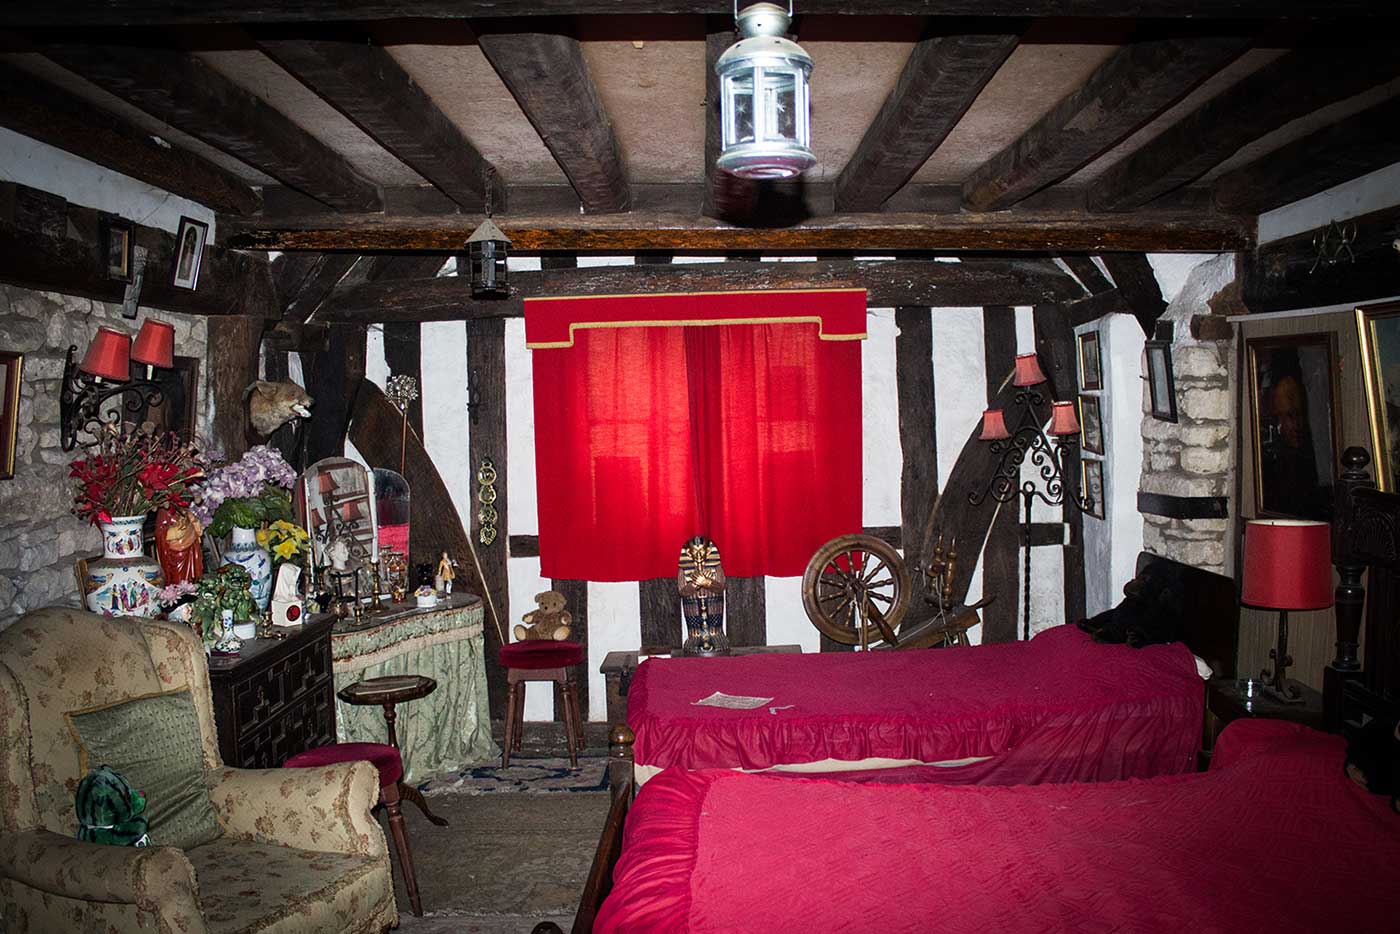 The Ancient Ram Inn: A Visit to 'England's Most Haunted - Ex Utopia